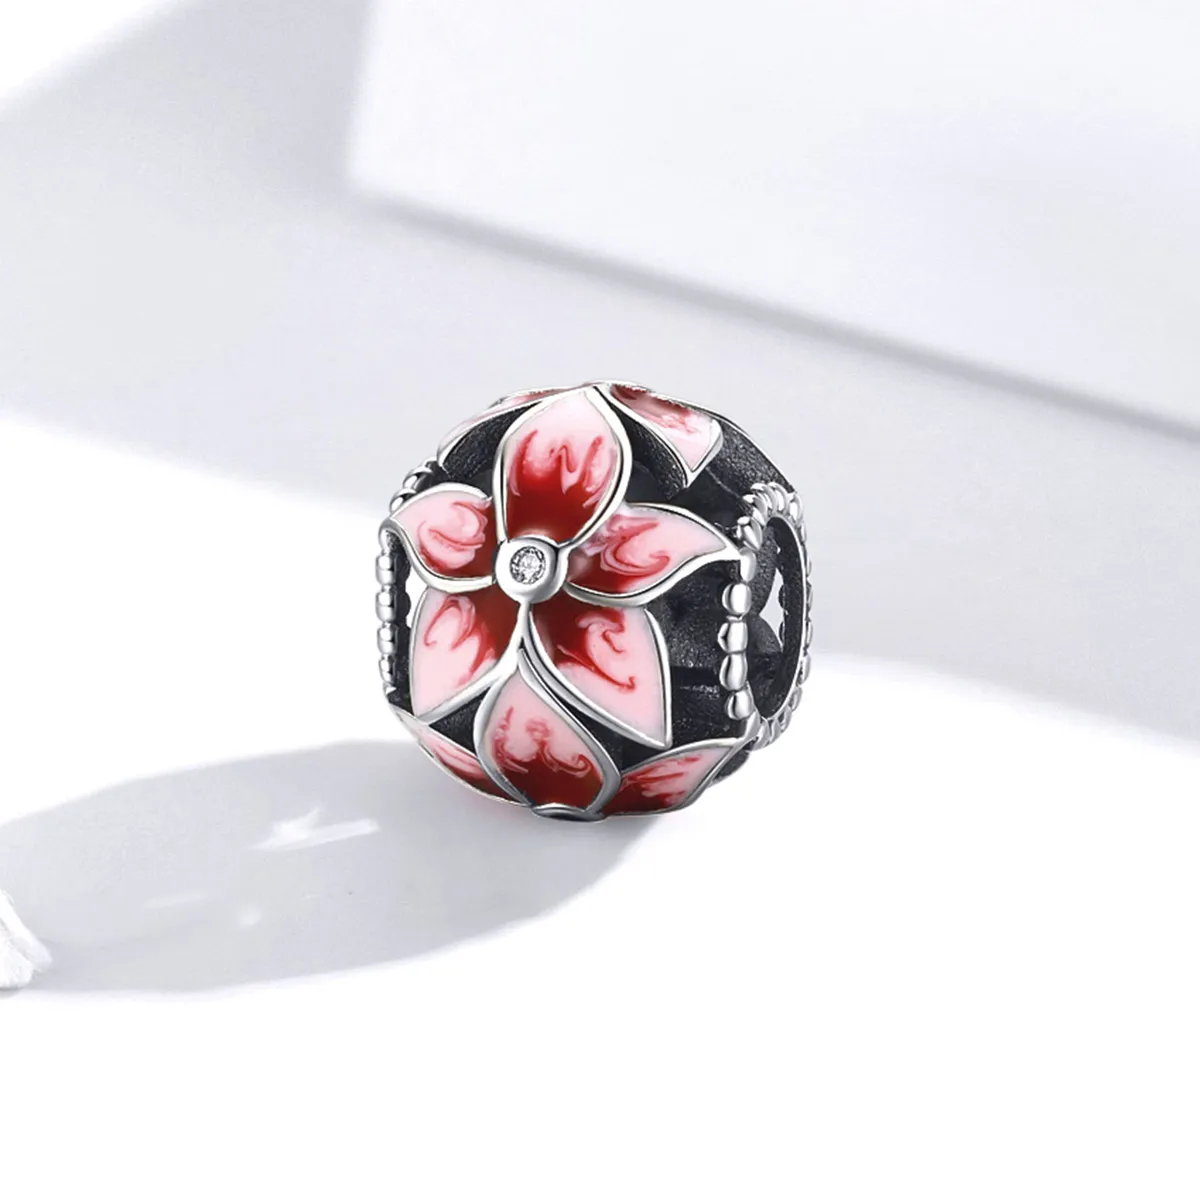 Pandora Style Silver Blooming Flower Charm - SCC1707